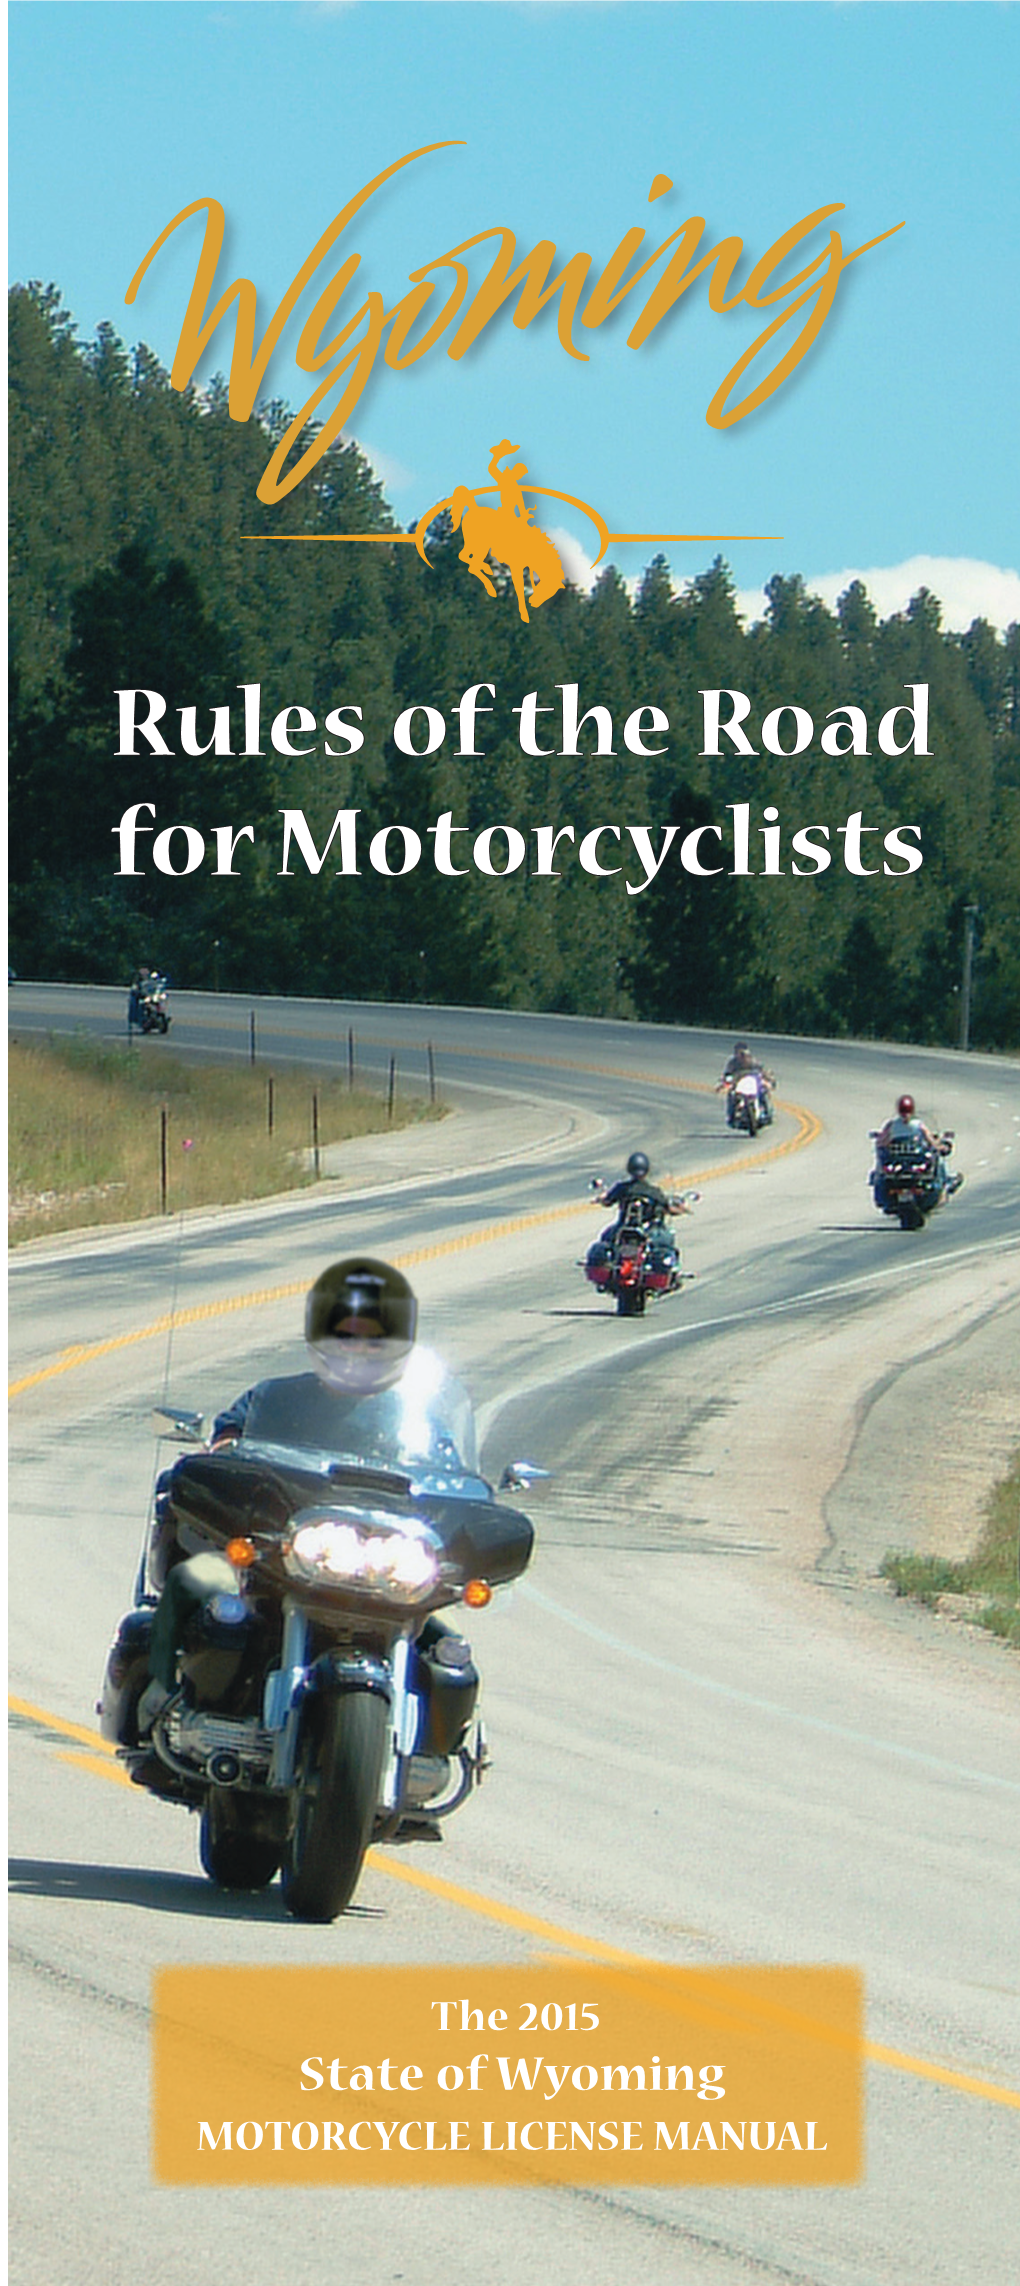 Rules of the Road for Motorcyclists